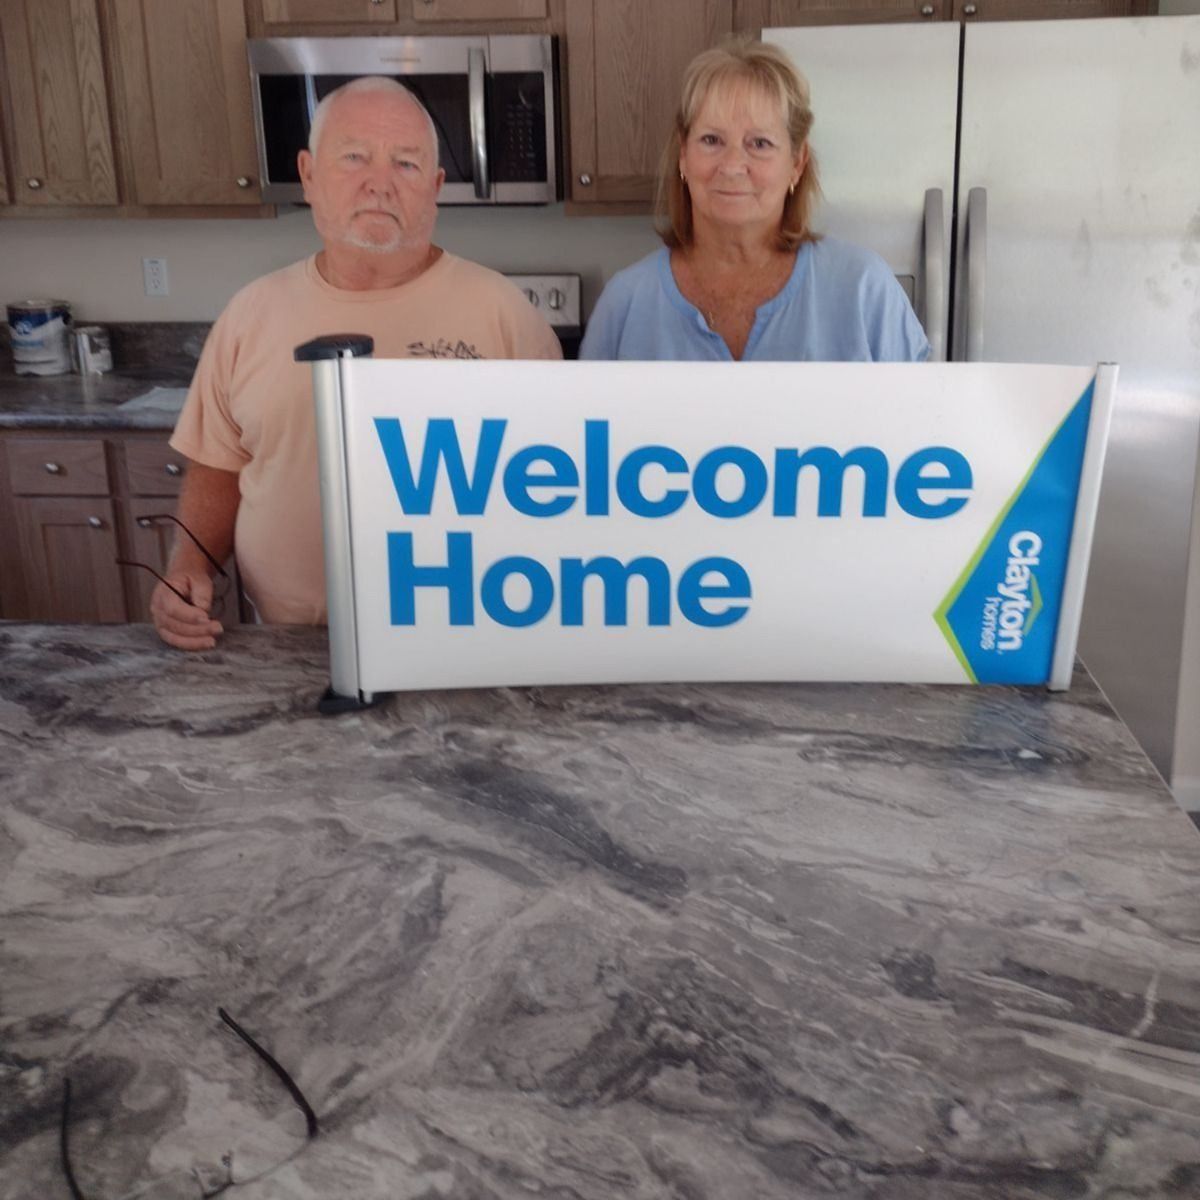 WILLIAM S. welcome home image